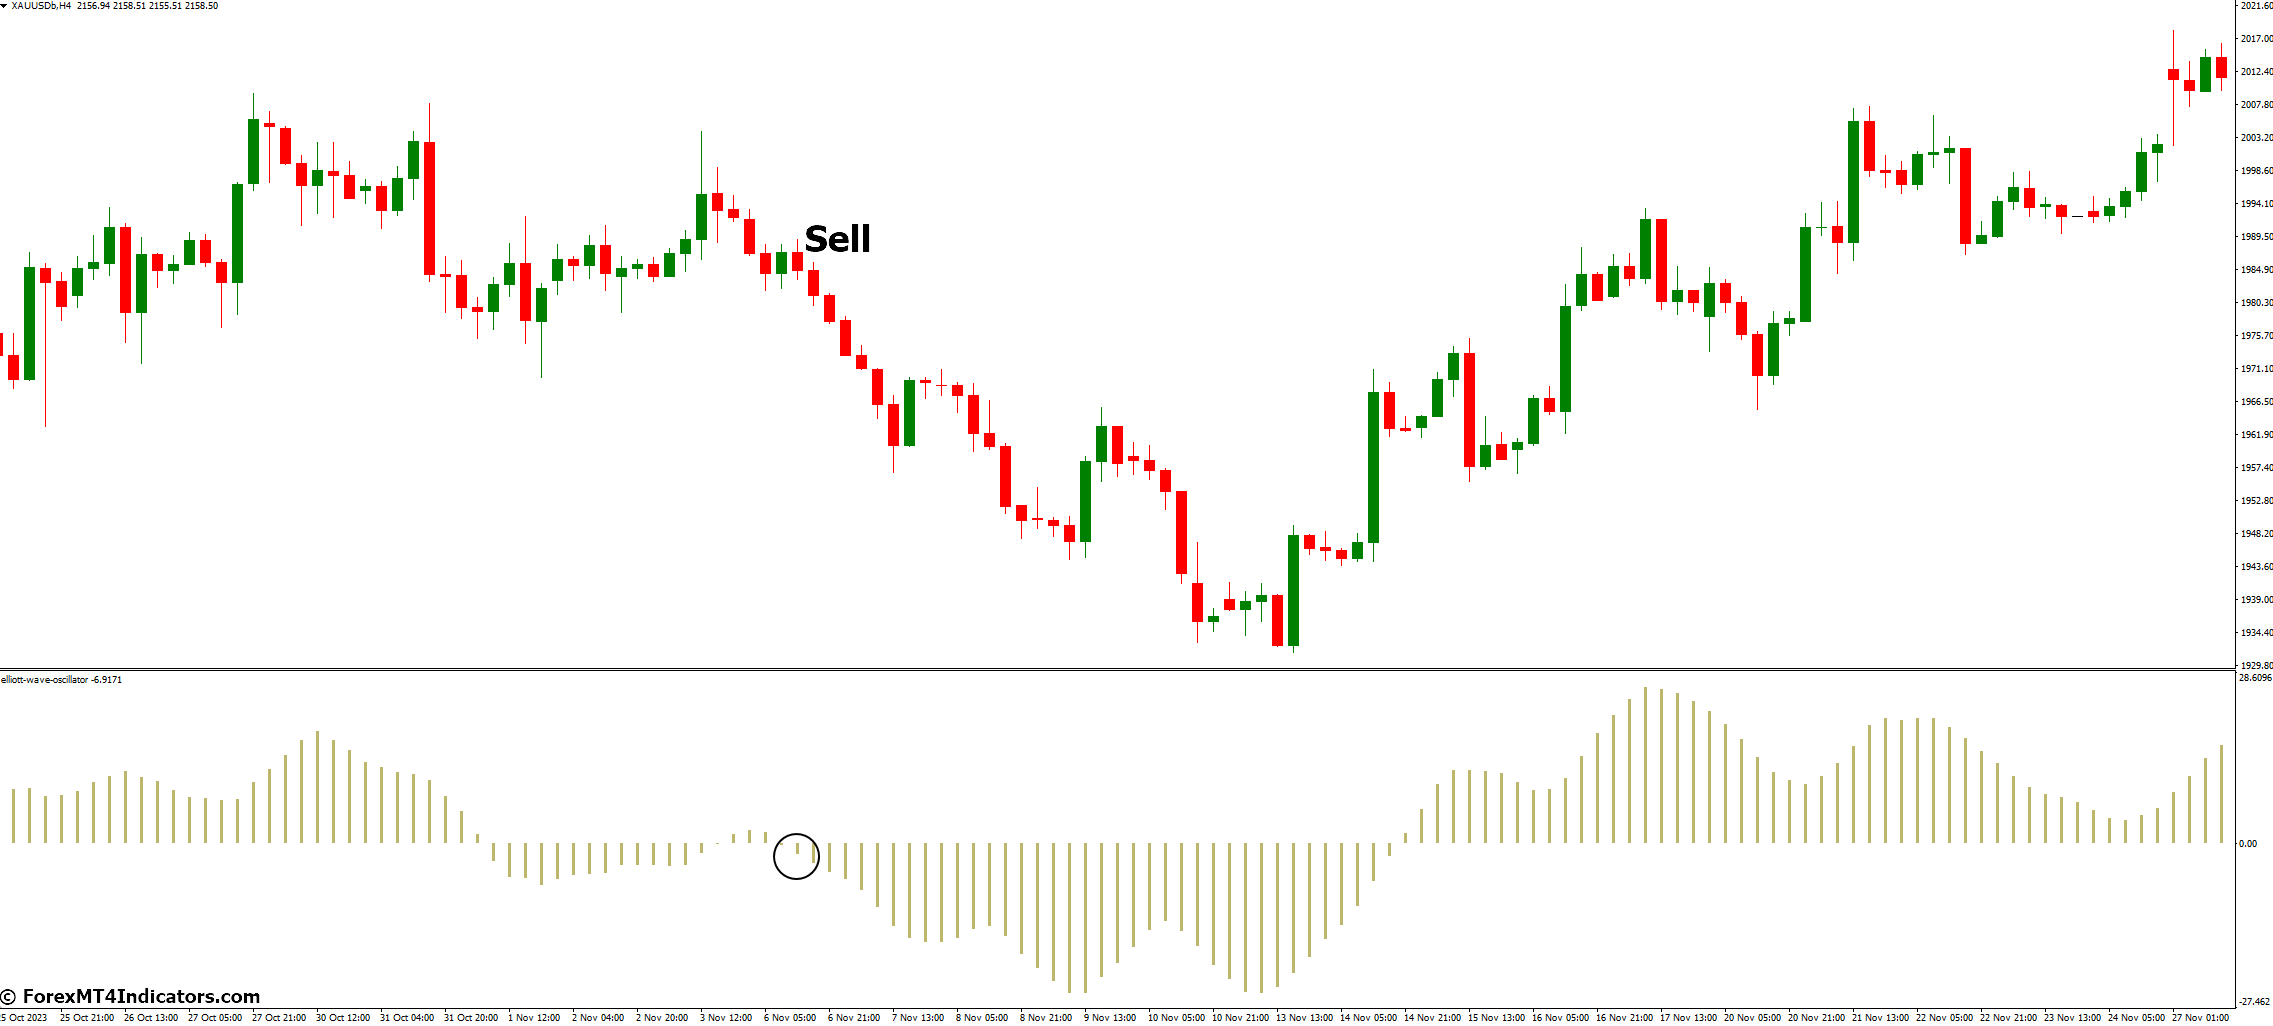 How to Trade With Elliott Wave Oscillator Indicator - Sell Entry